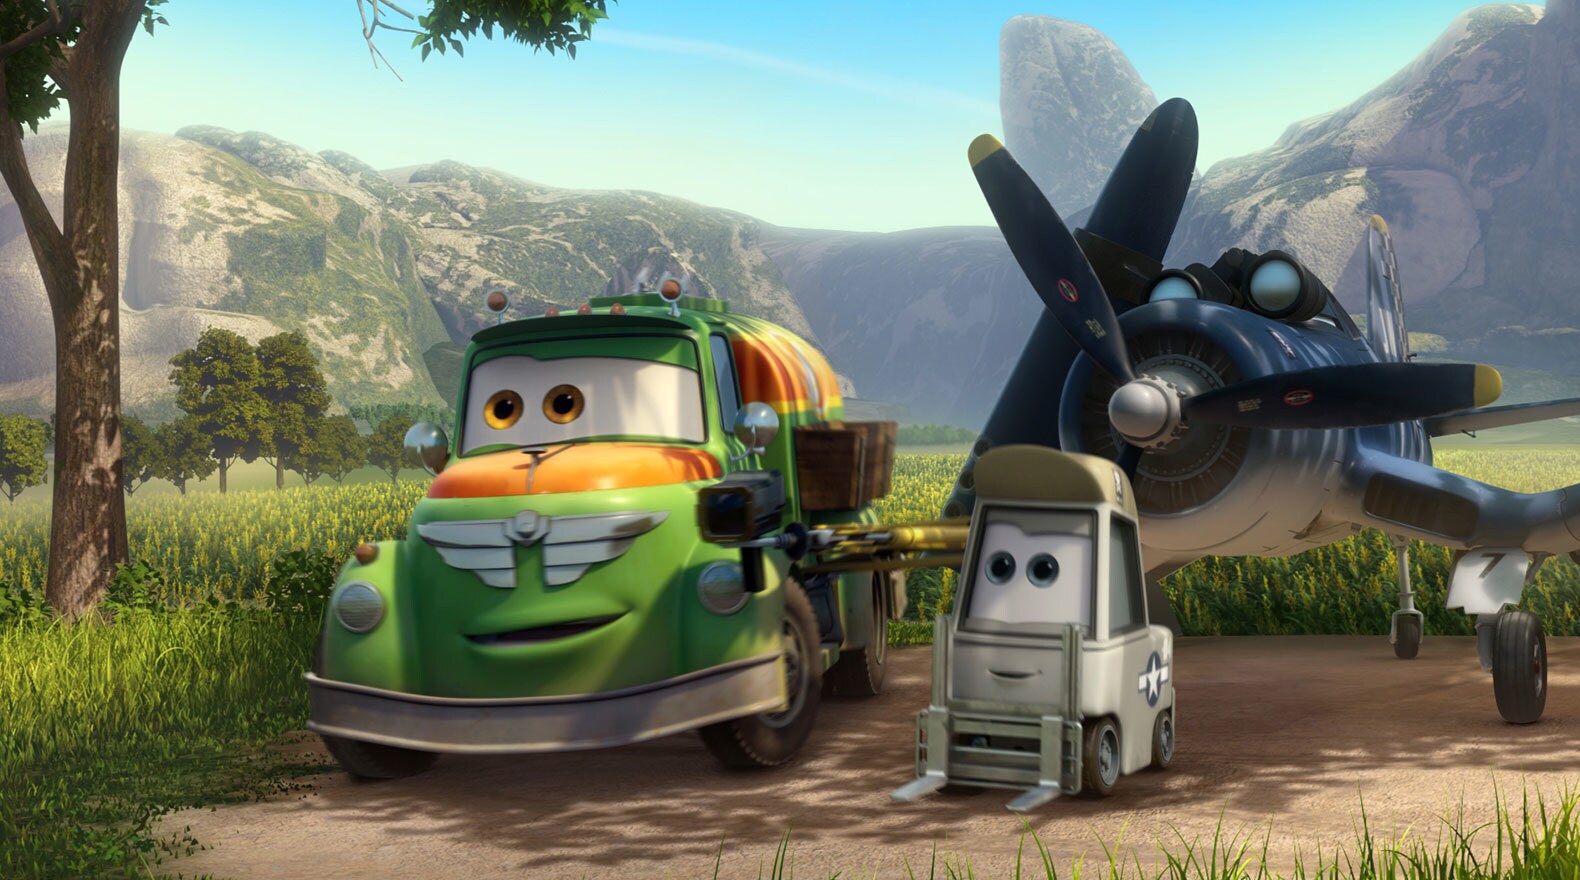 Chug, Sparky and Skipper watch from the ground as Dusty trains for his big race.